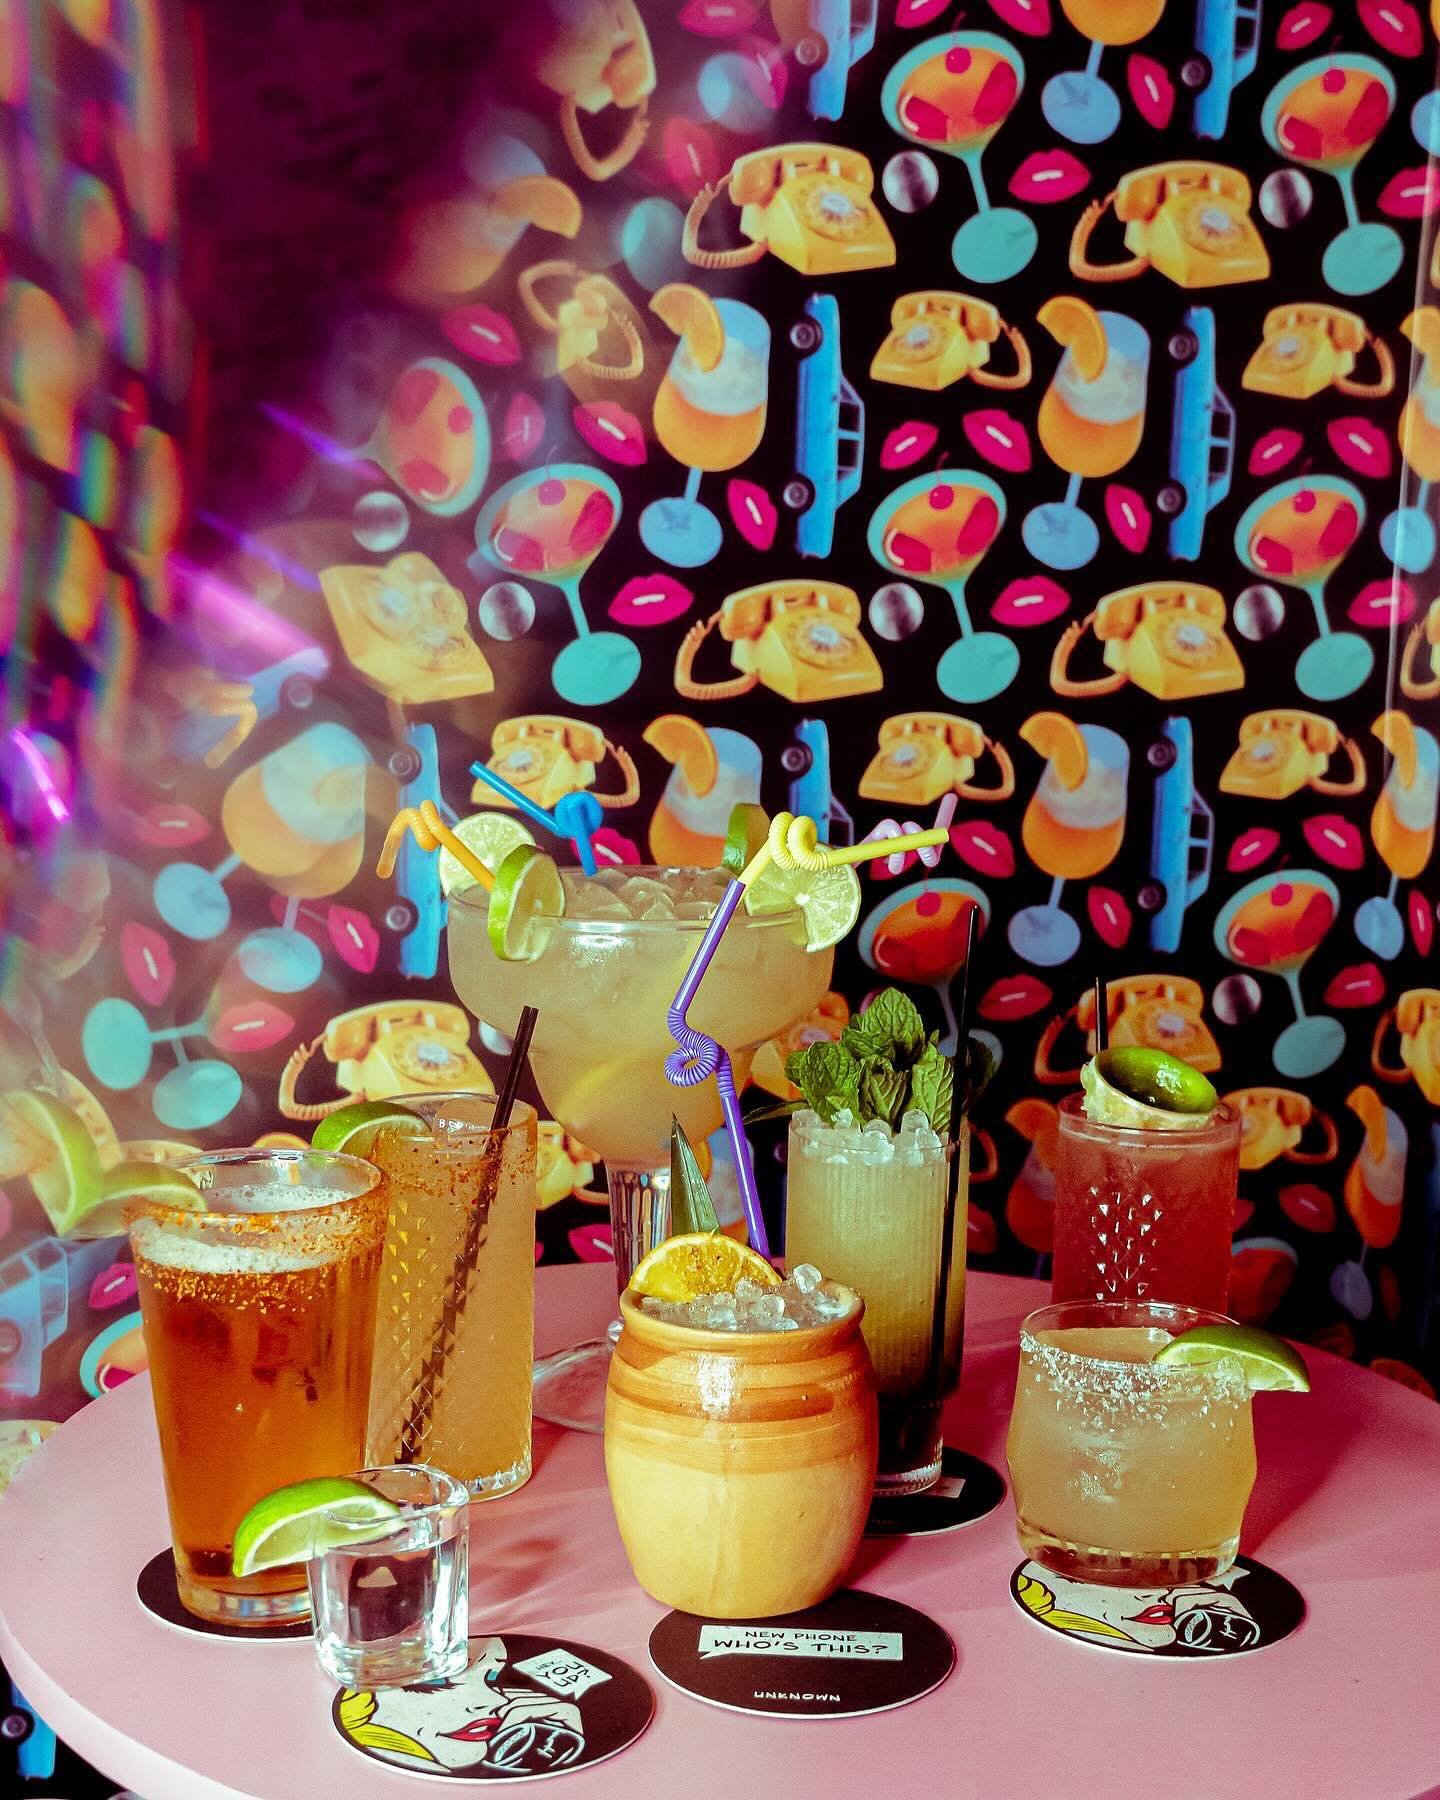 Celebrate Cinco De Mayo at Unknown! 🍋&zwj;🟩🇲🇽 🍹

This whole weekend (Fri-Sun) we have some celebratory deal specials to kick off the summer season out on the patio!! ☀️🤩

🍹 Patron Margarita
🍹 Paloma
🍹 El Diablo
🍹 Mexican Painkiller

💲60 SH